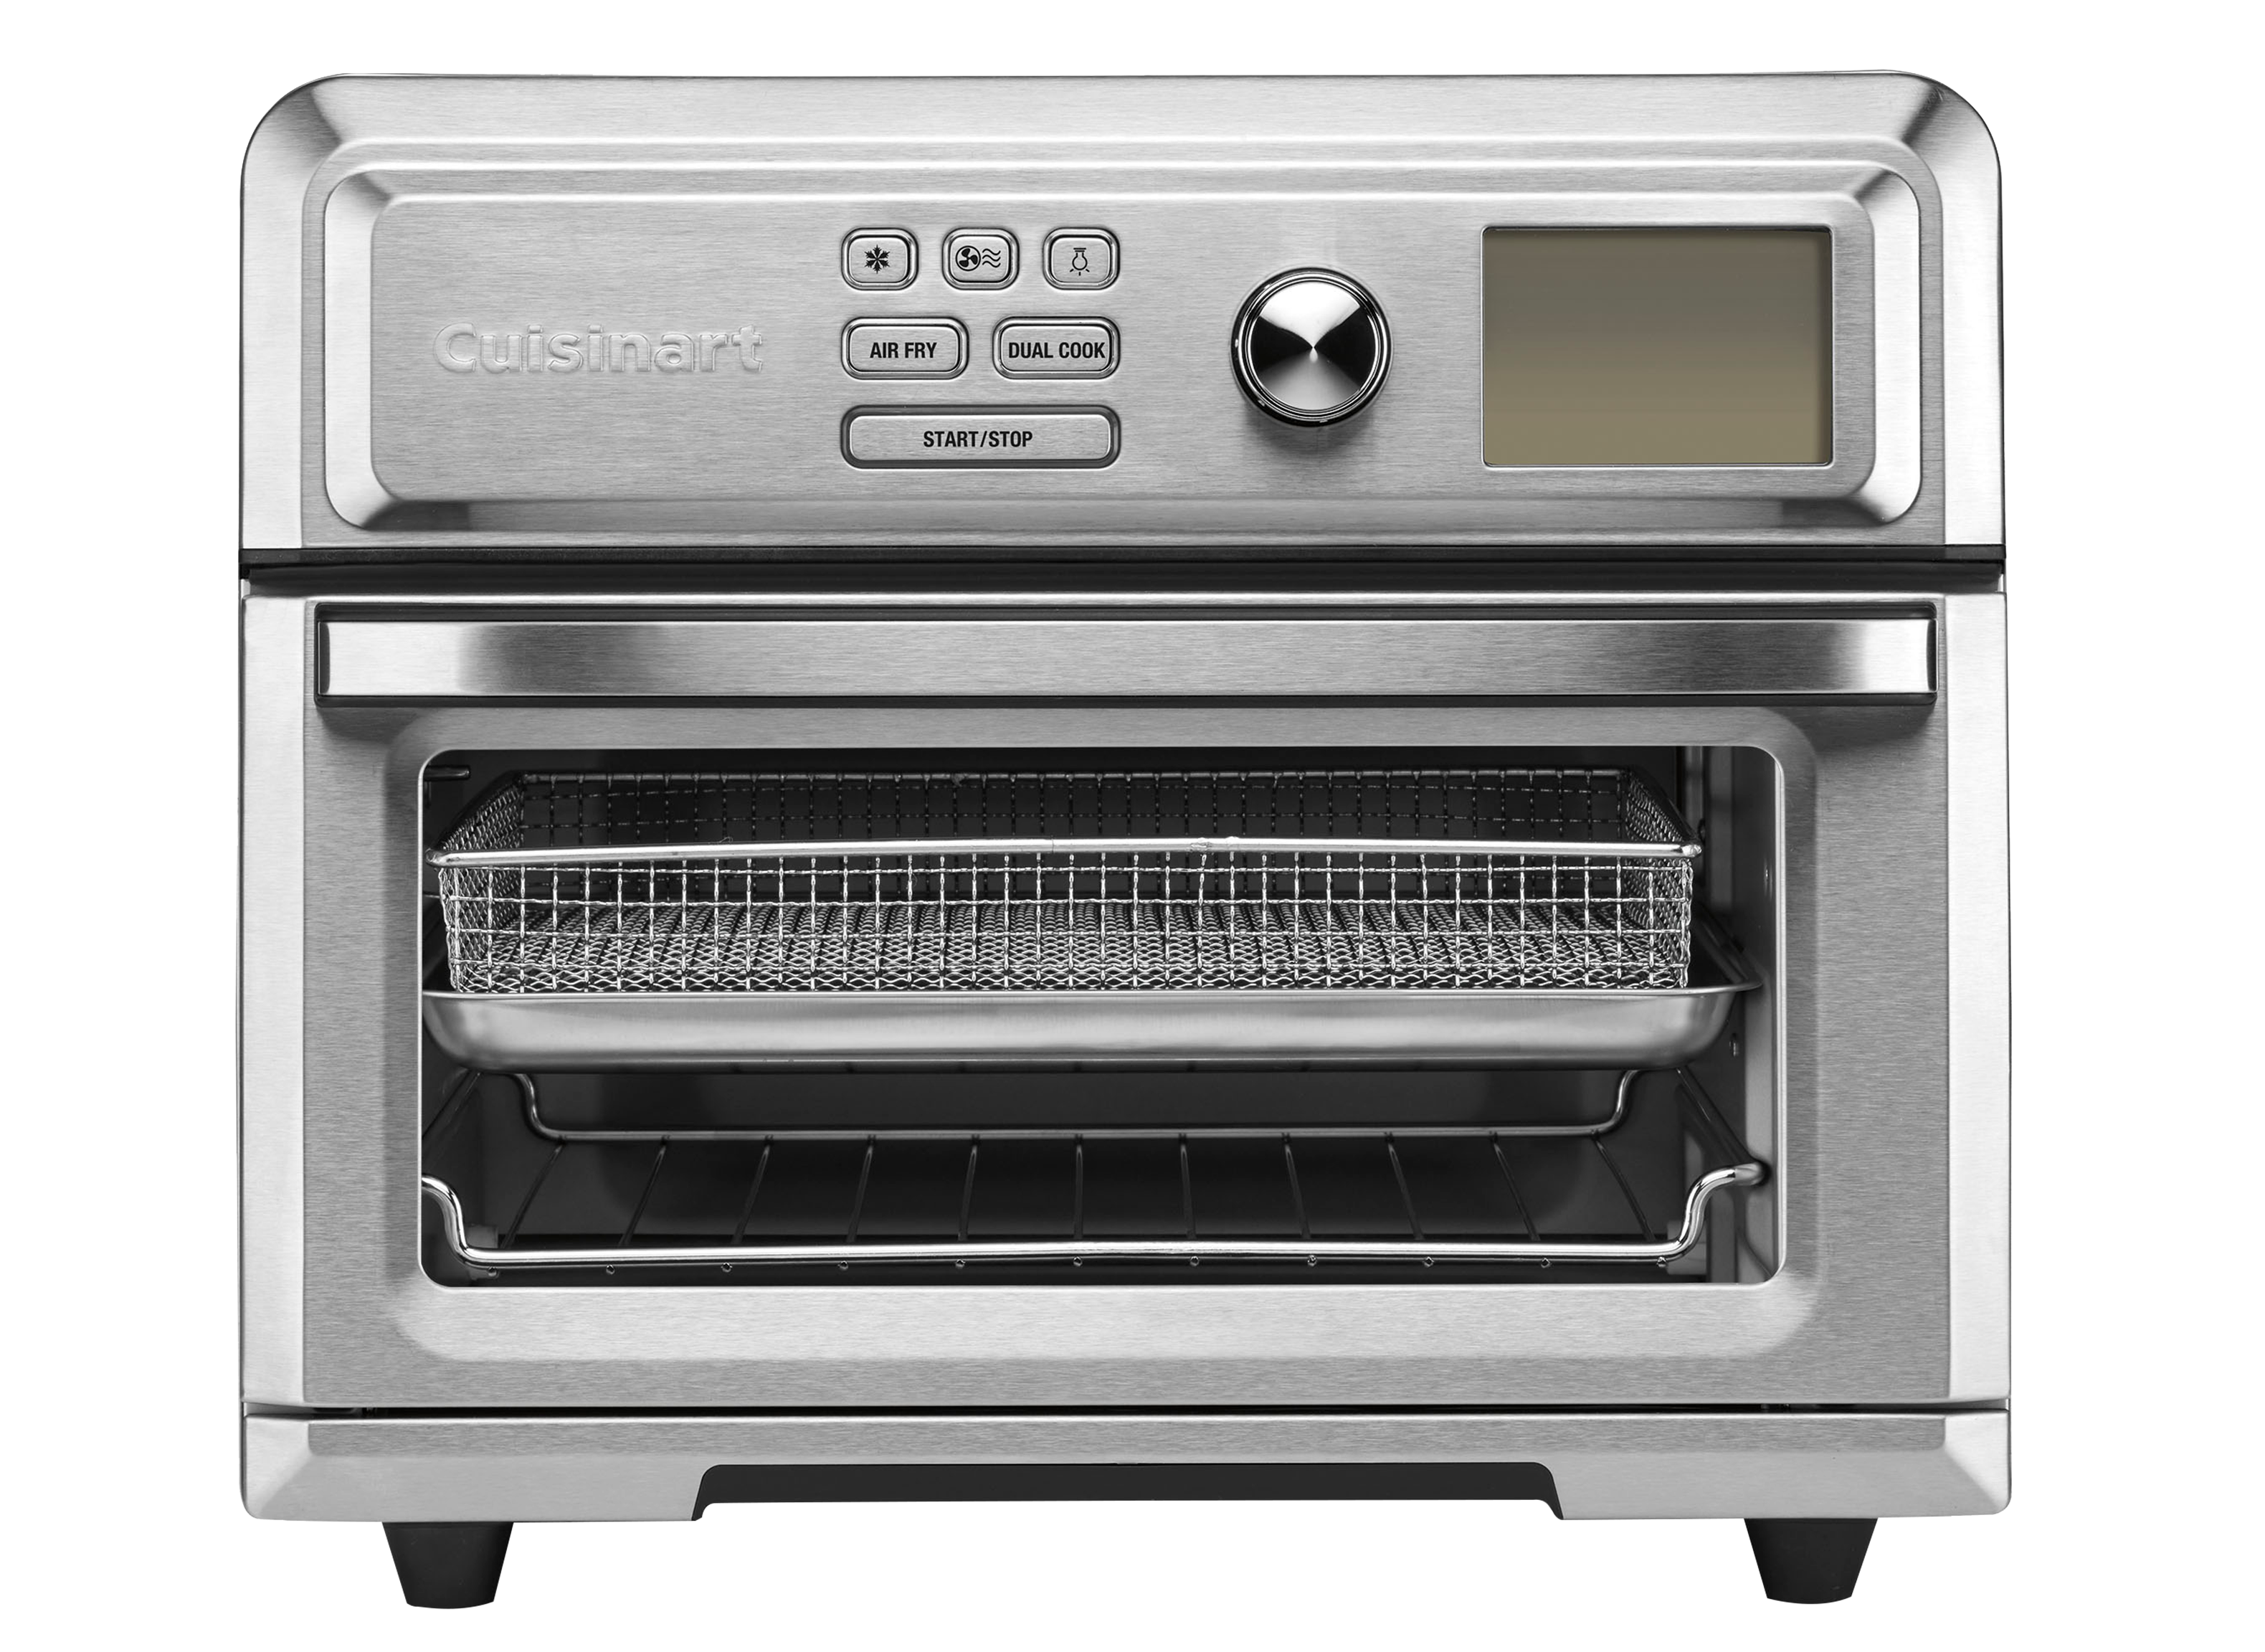 How to Get the Most Out of Your Toaster Oven - Consumer Reports